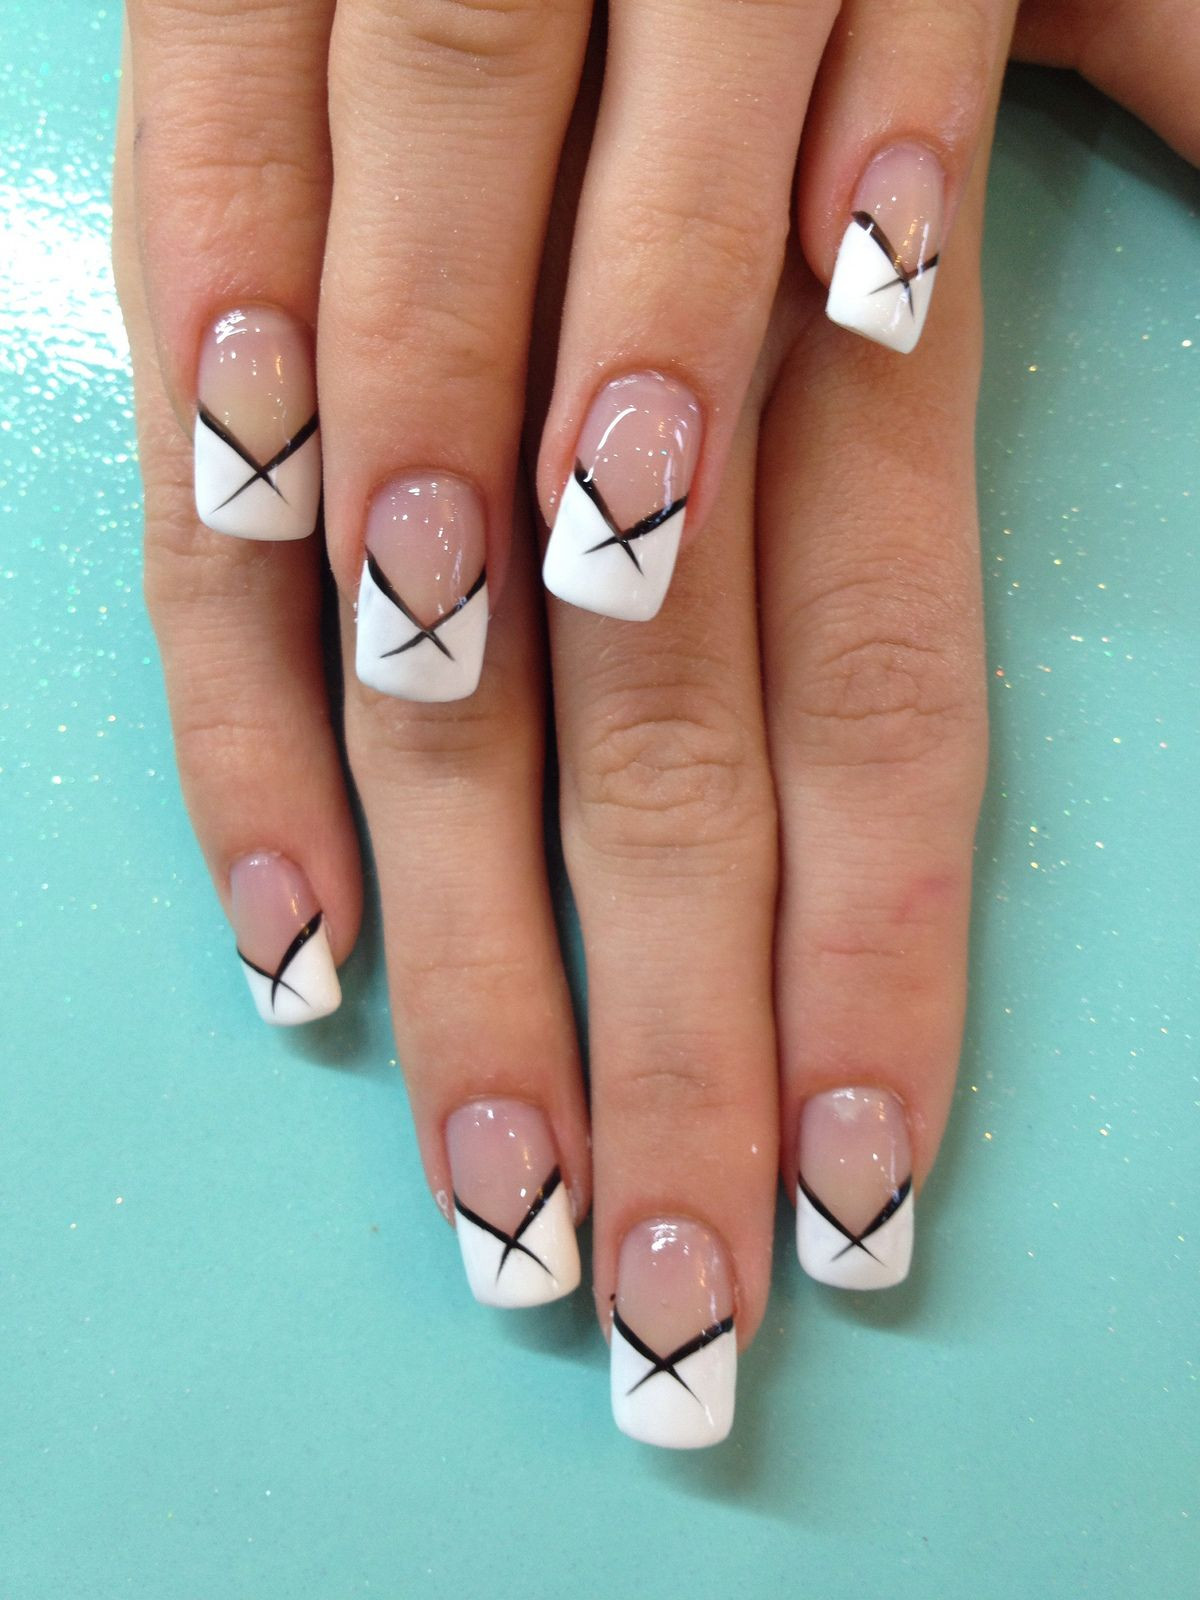 White Tips Nail Art
 Cool White French tips with black flick nail art